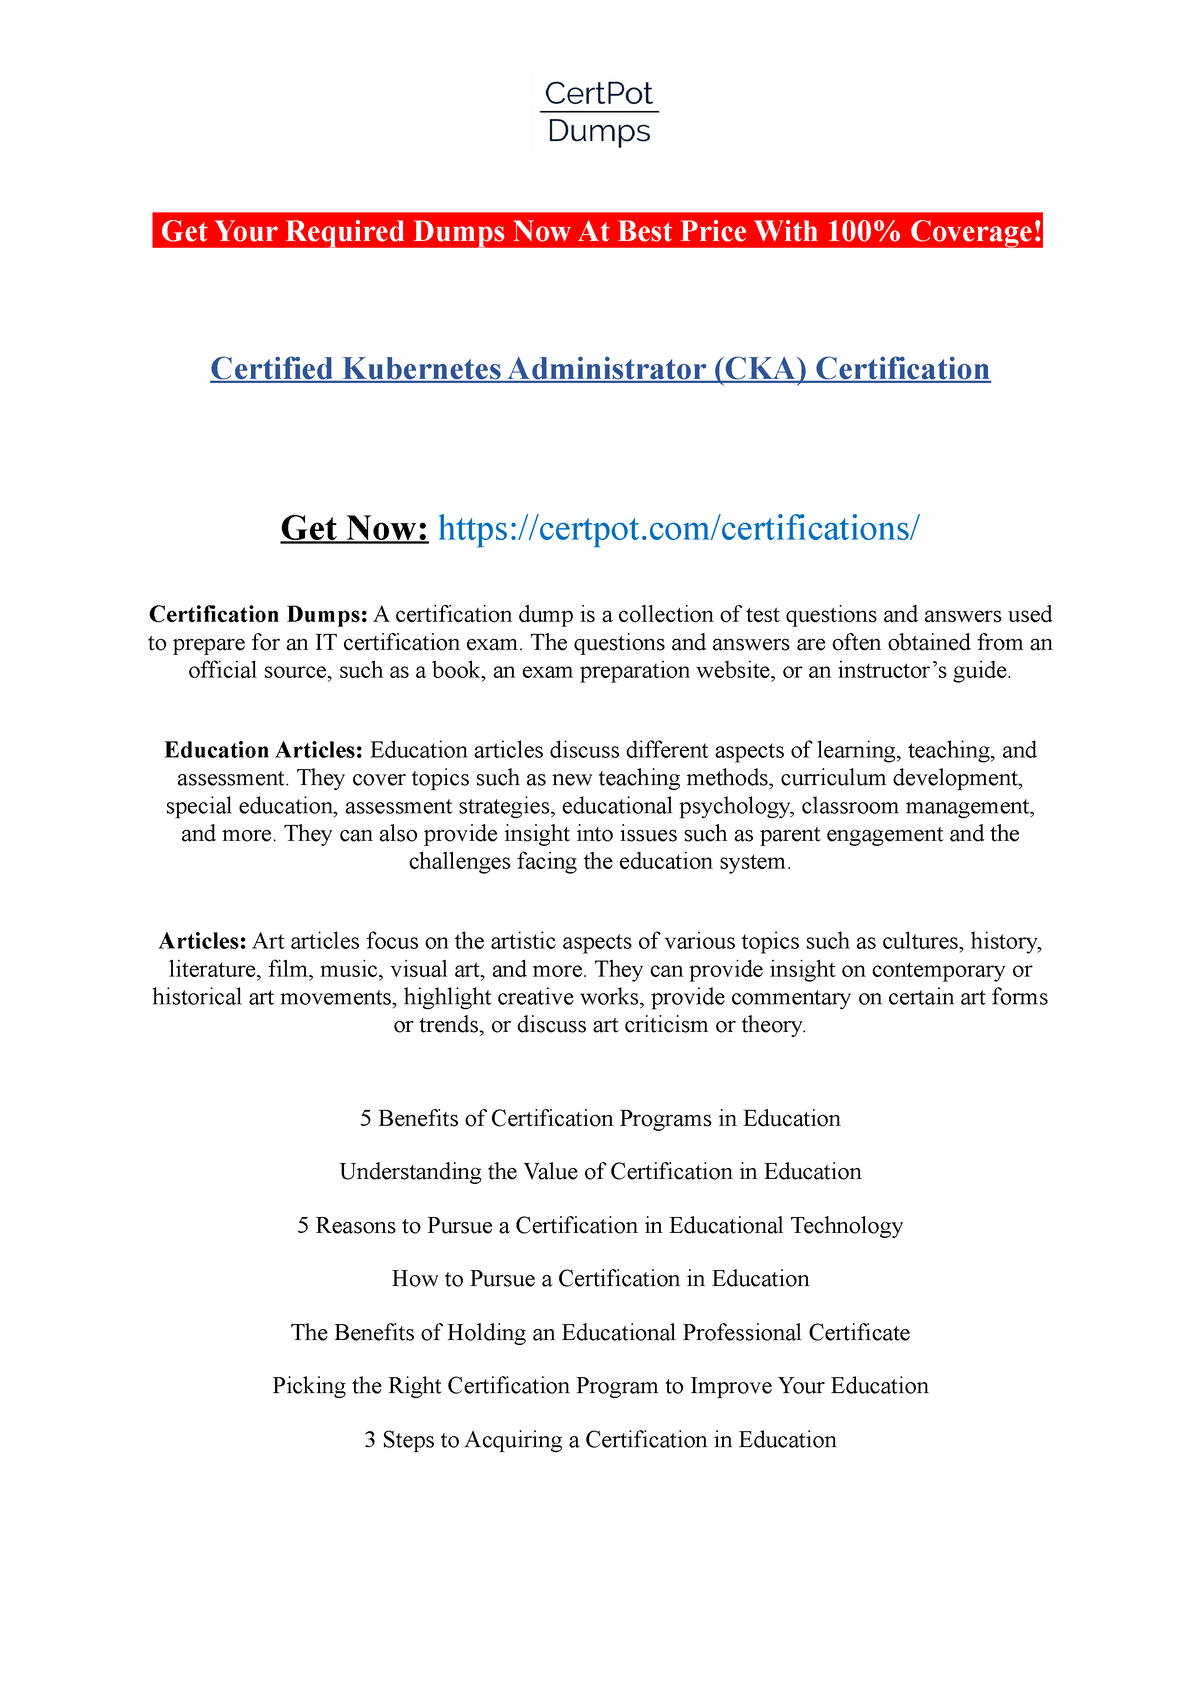 Certified Kubernetes Administrator (CKA) Certification Get Your